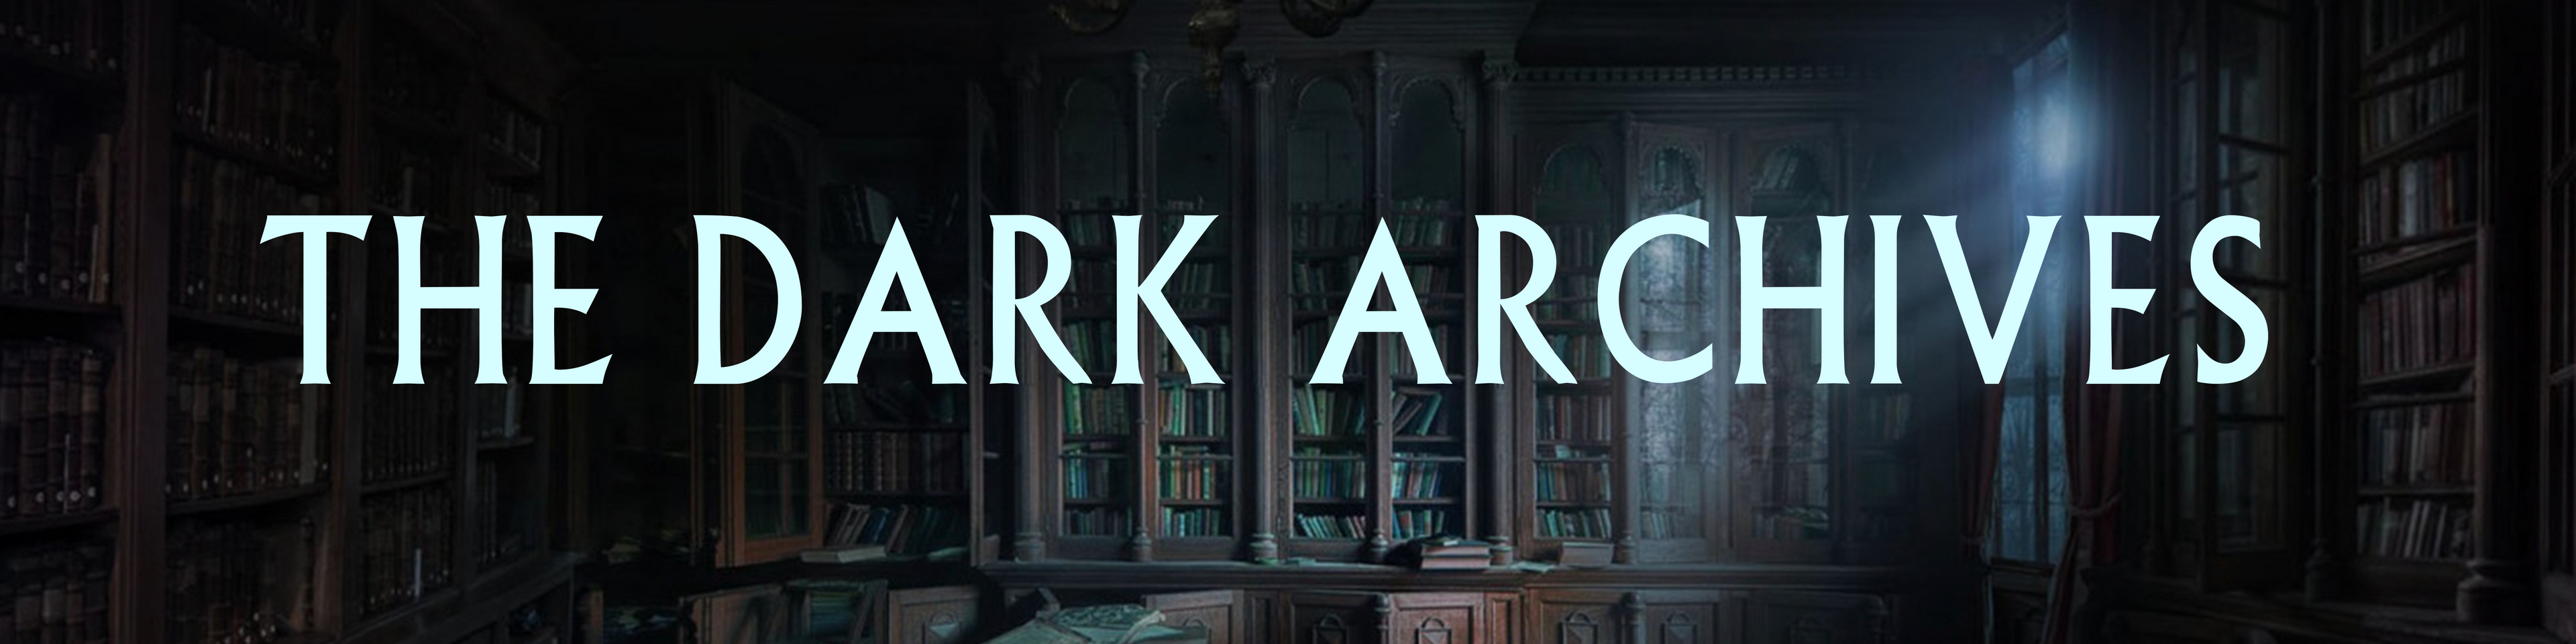 A H.P Lovecraft inspired library as the banner for Sideworld's The Dark Archives collection